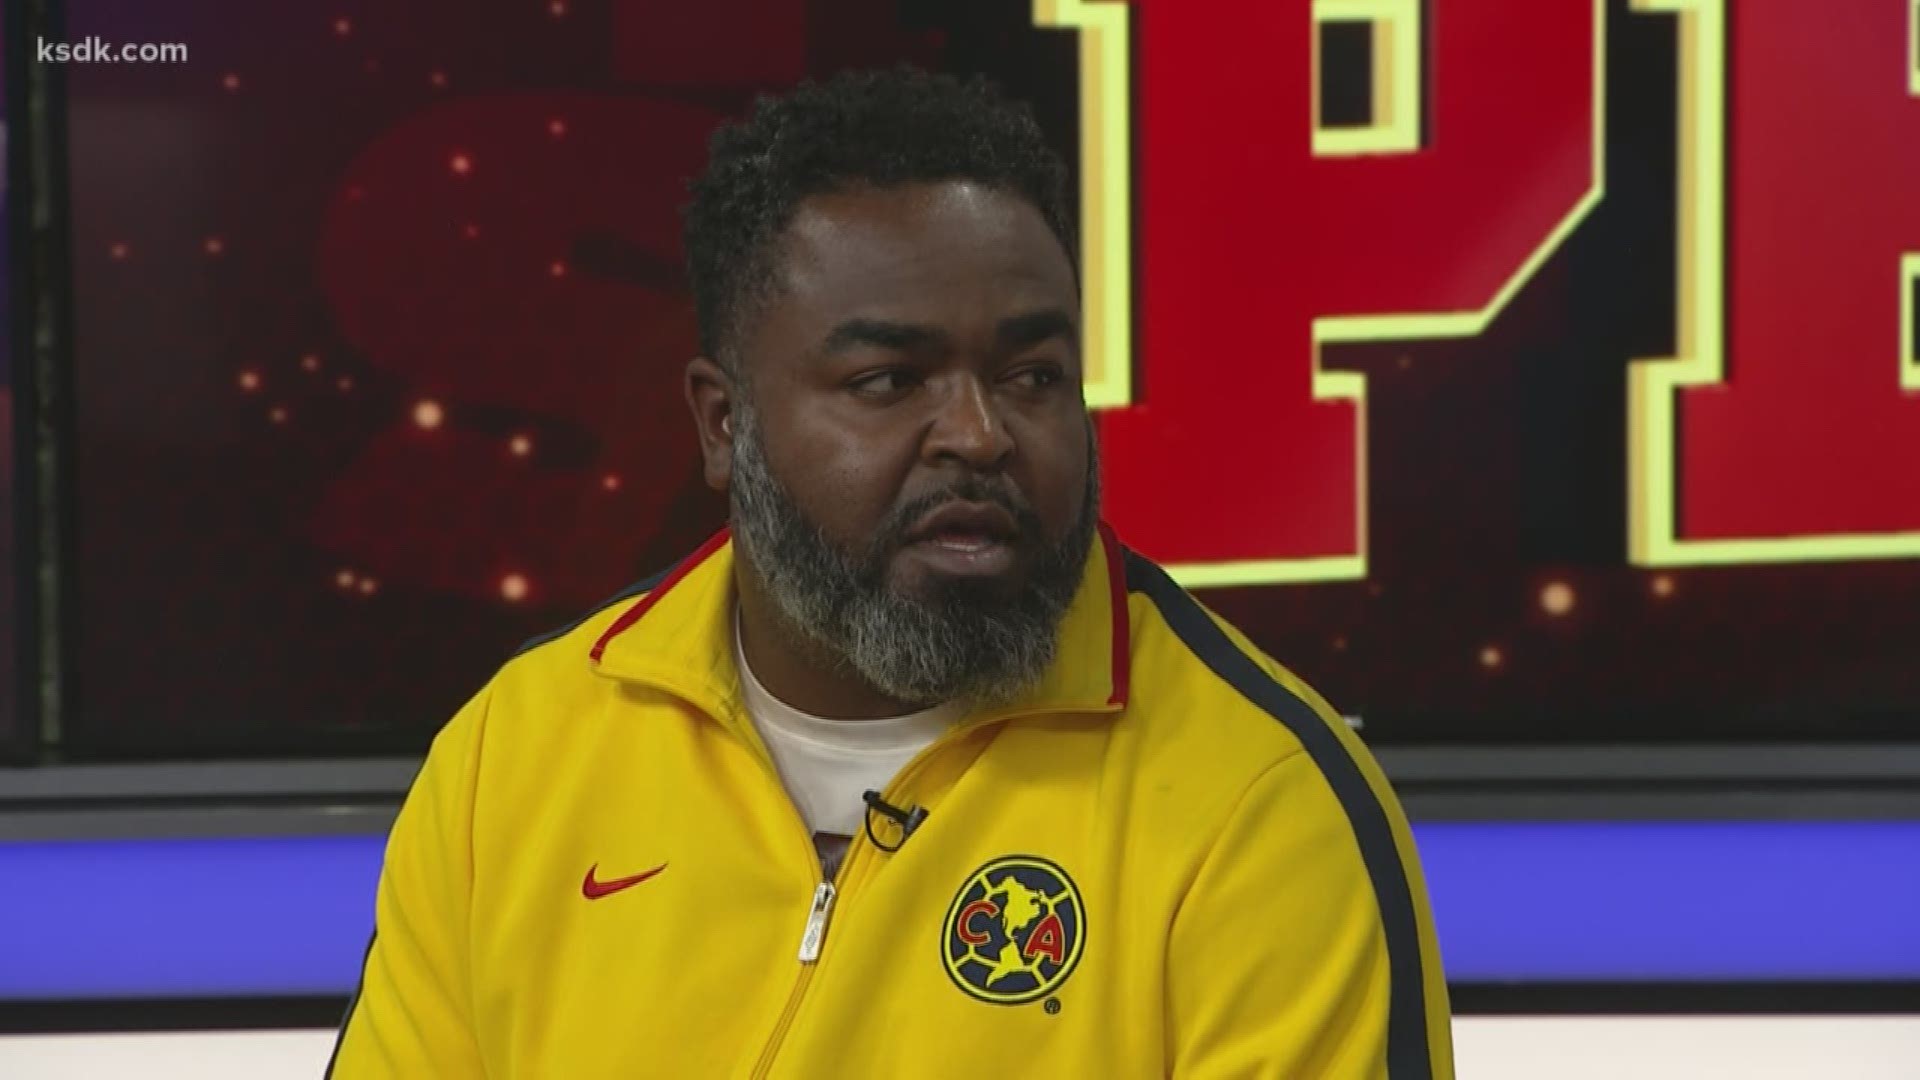 Former Cardinal Ritter Head Coach Brandon Gregory spoke to 5 On Your Side after a scandal ended the team's season and got the entire coaching staff fired.